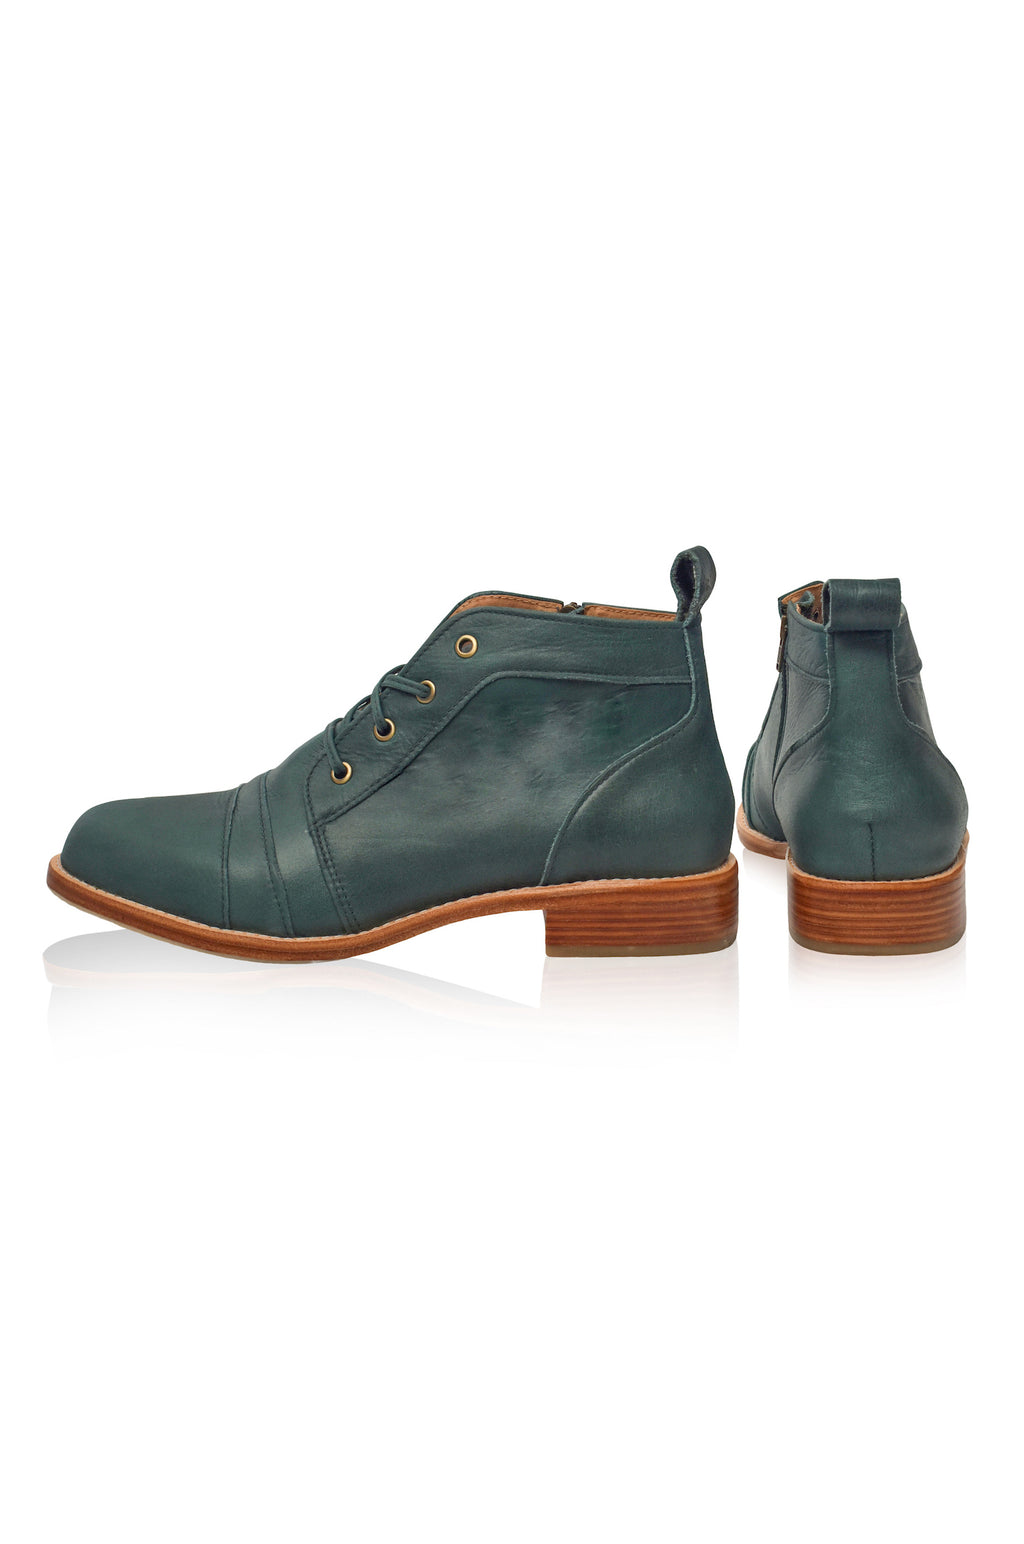 Passage Lace Up Boots - Emerald / 8.5